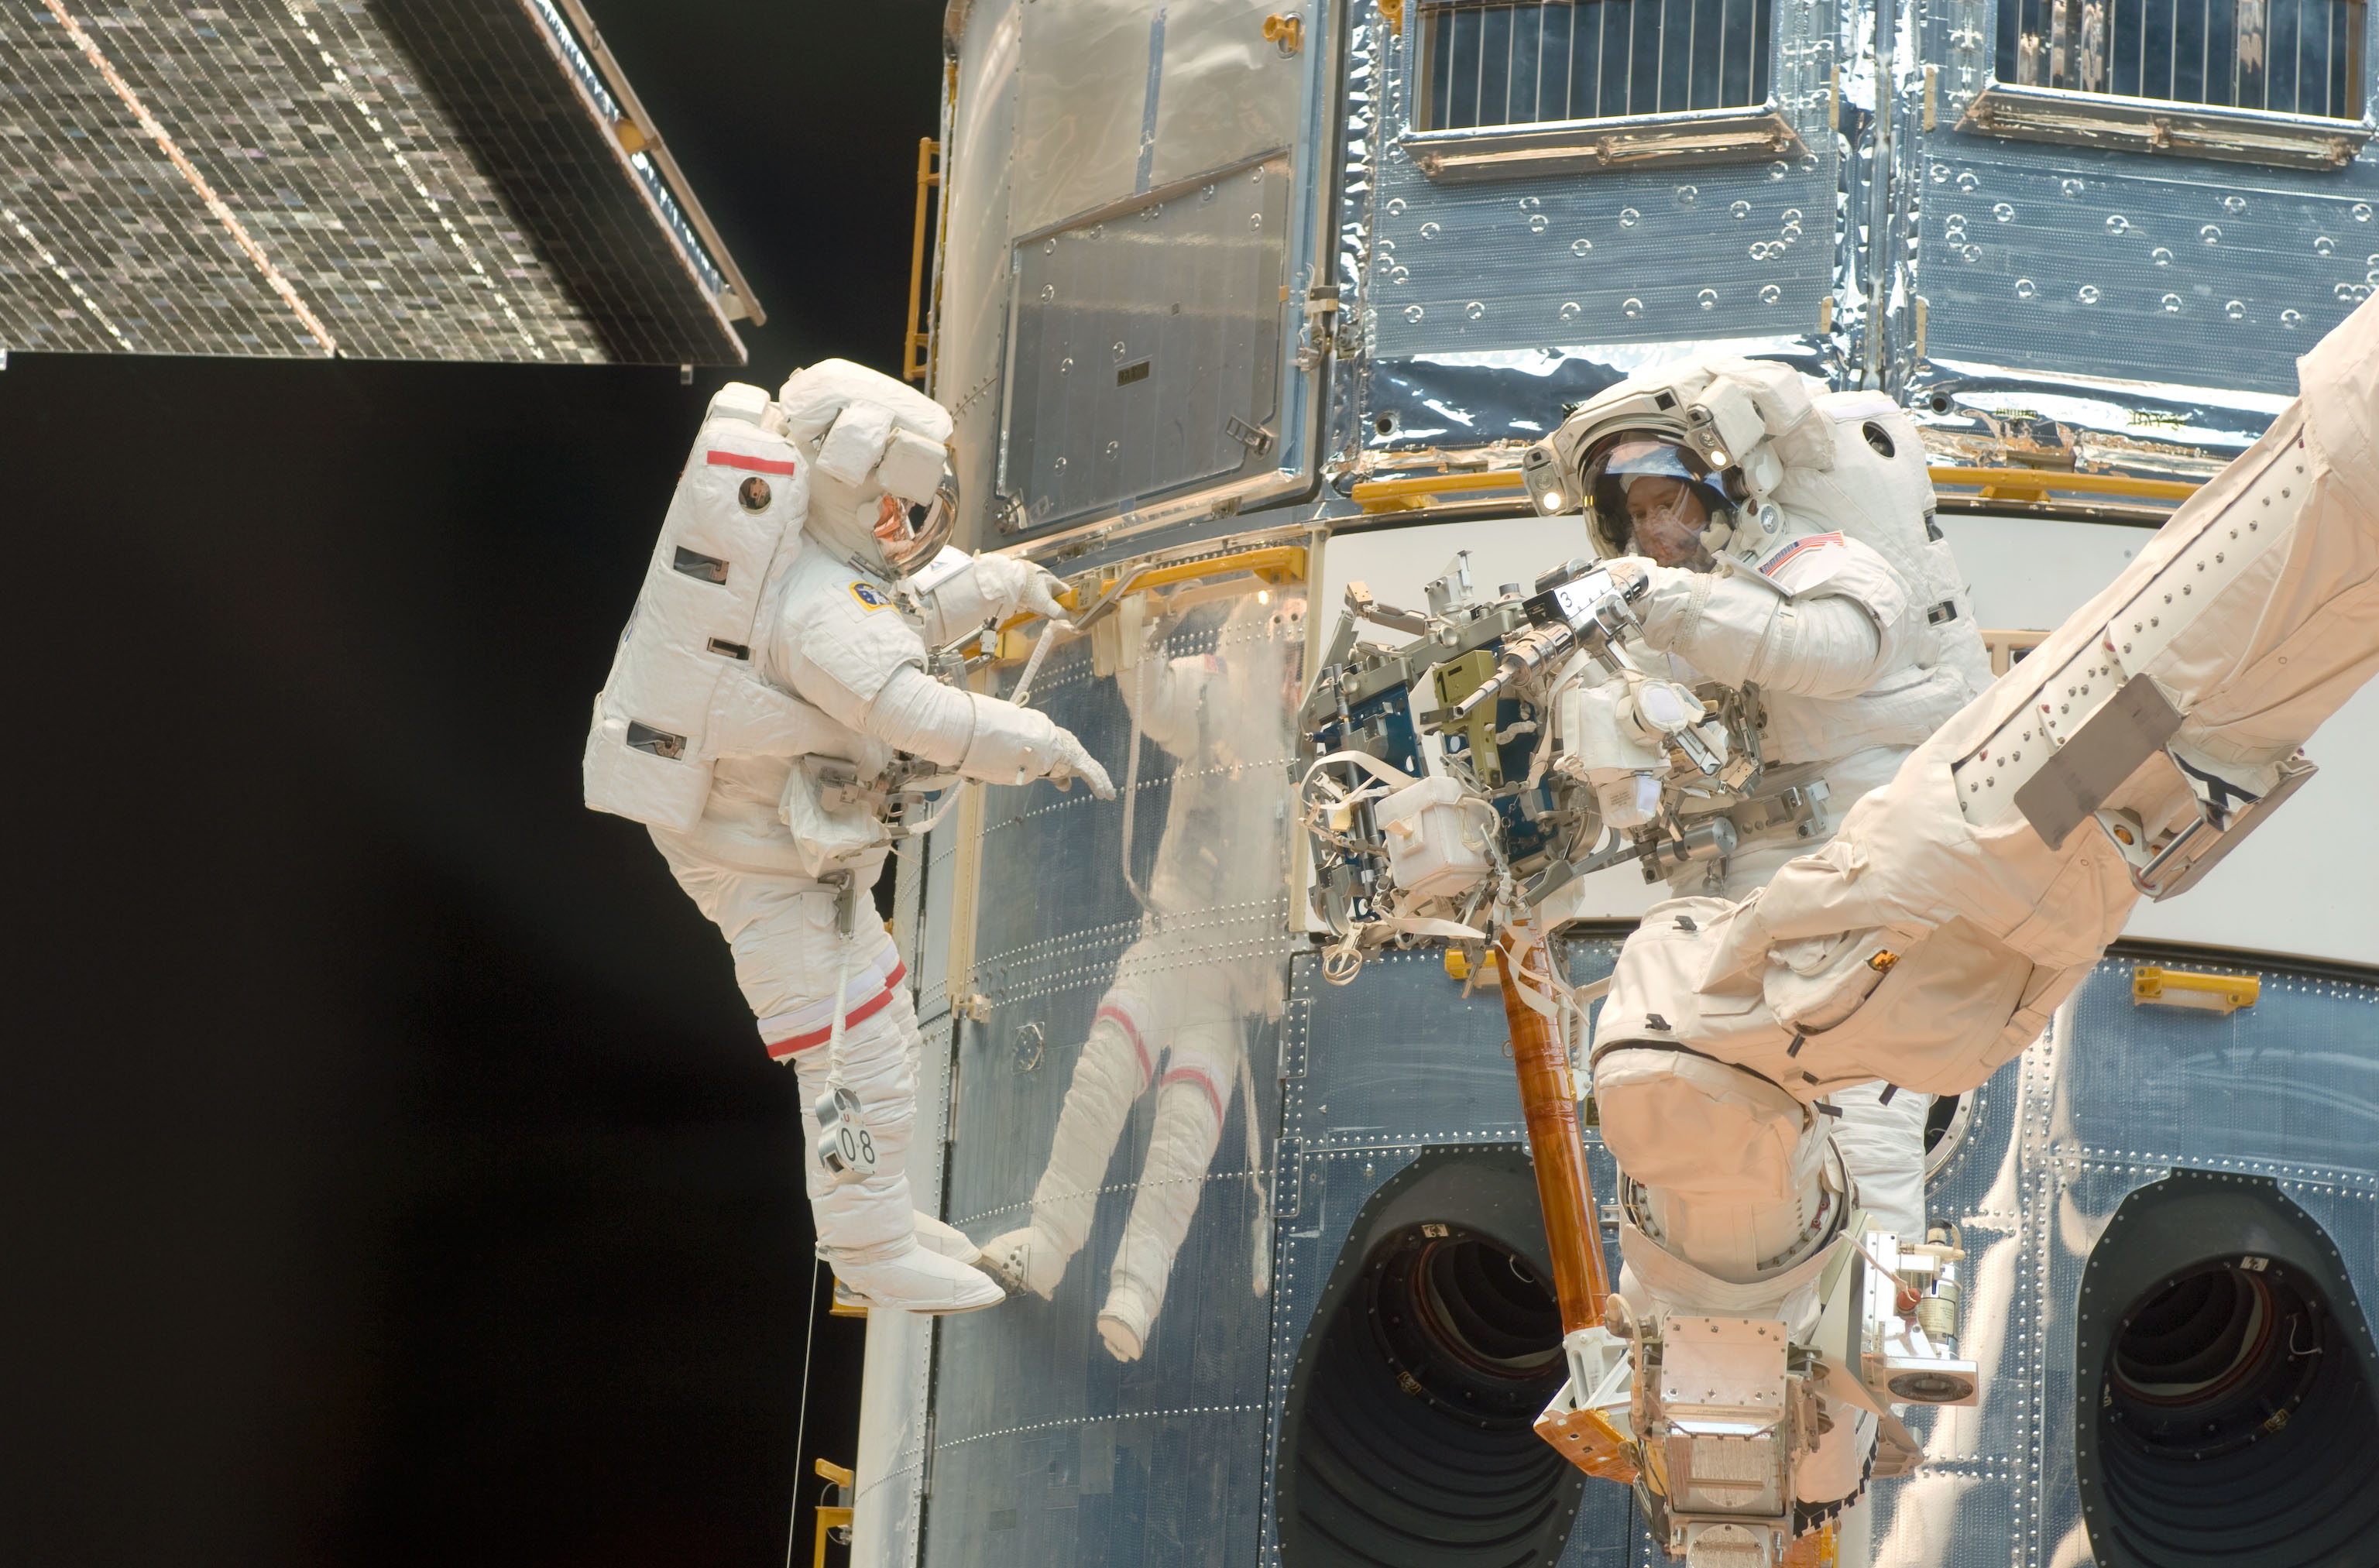 One astronaut holds to a yellow handrail on the Hubble telescope while another, perched on the shuttle's robotic arm, examines a drill-like power tool.